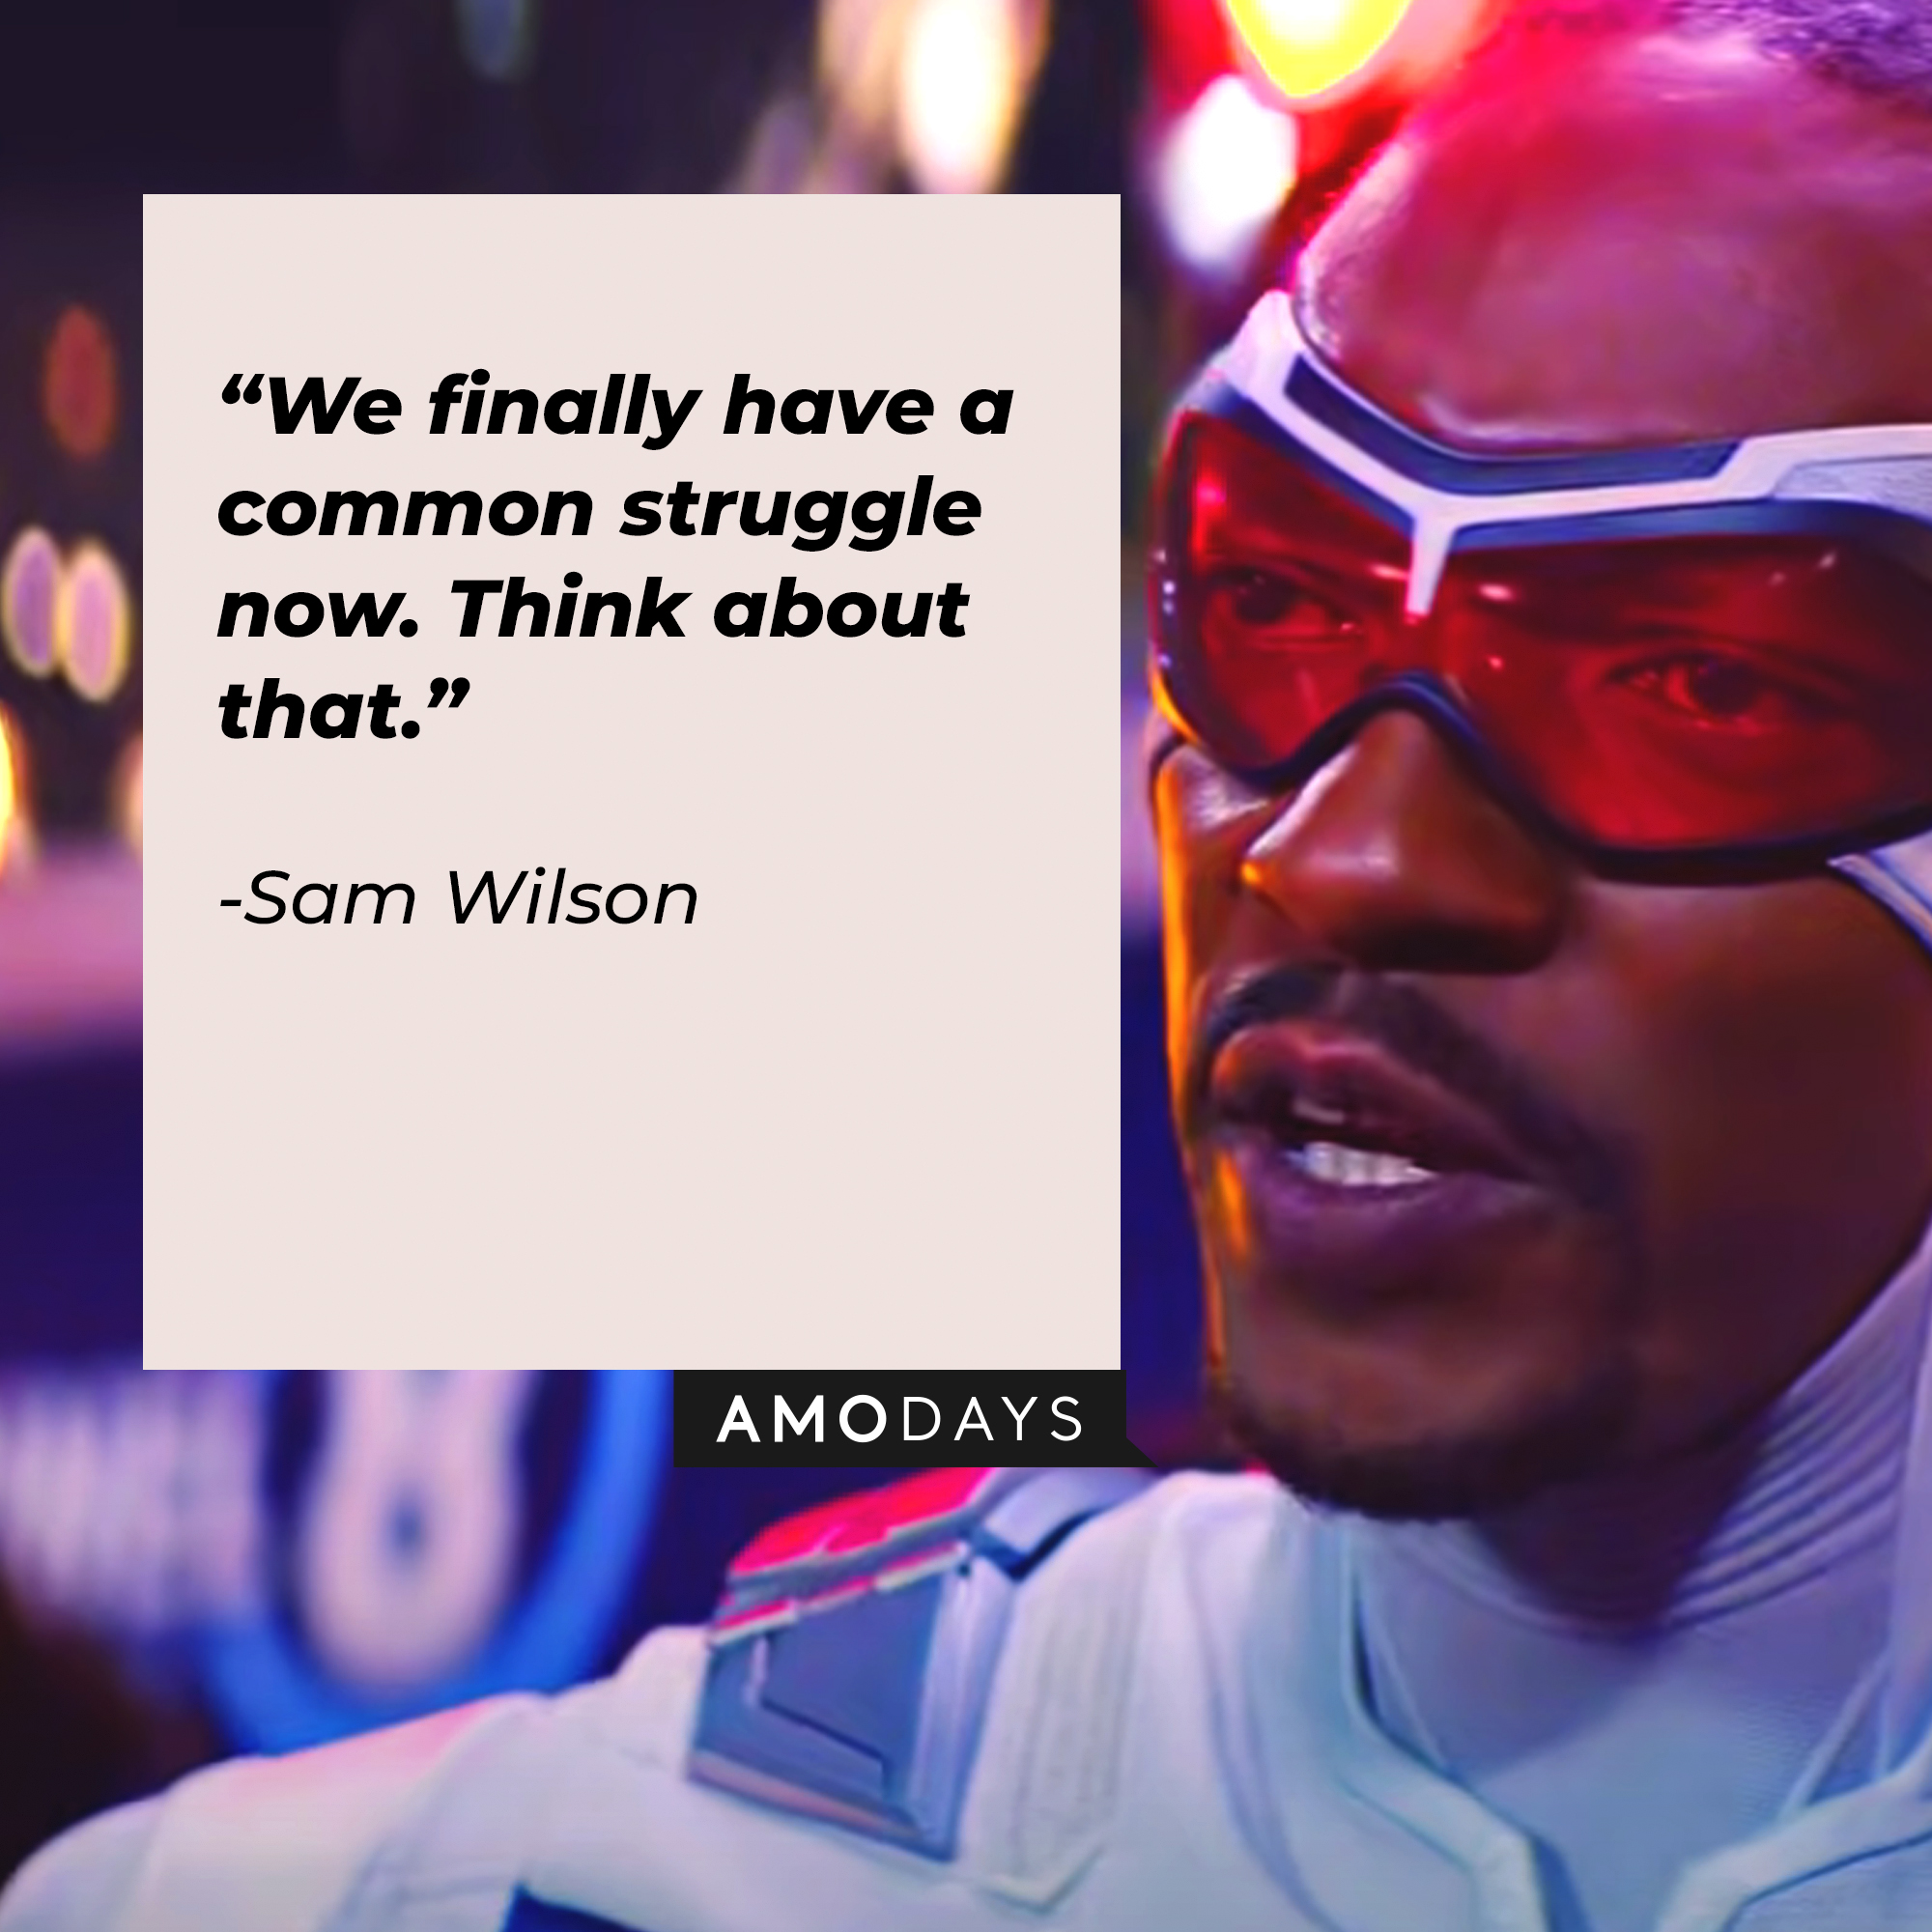 Sam Wilson, with his quote: “We finally have a common struggle now. Think about that.” | Source: Youtube.com/marvel